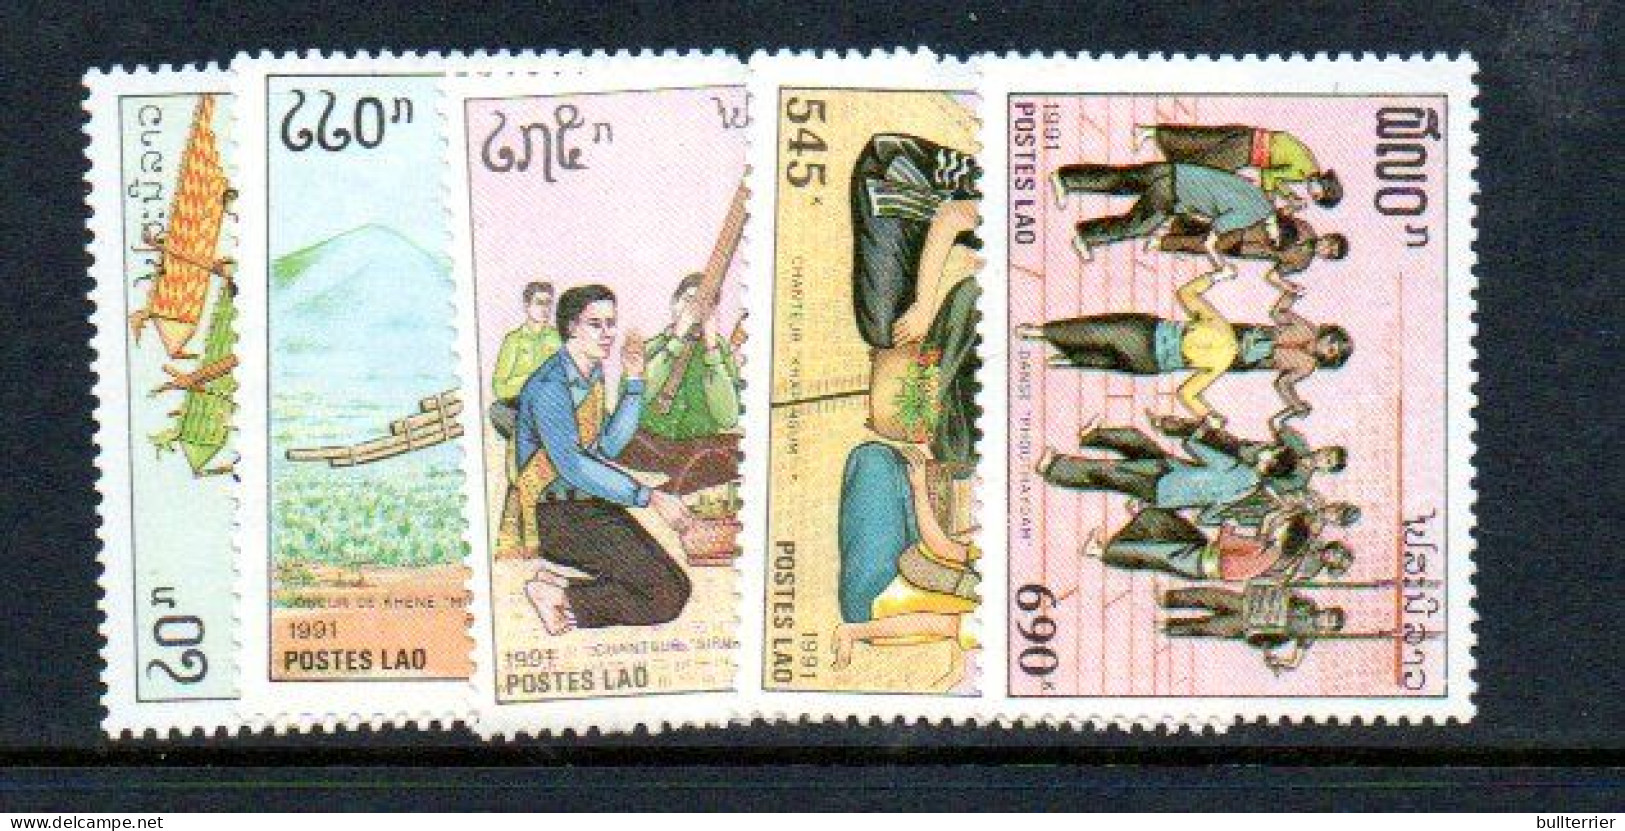 LAOS - 1991- TRADITIONAL MUSIC SET OF 5  MINT NEVER HINGED - Laos